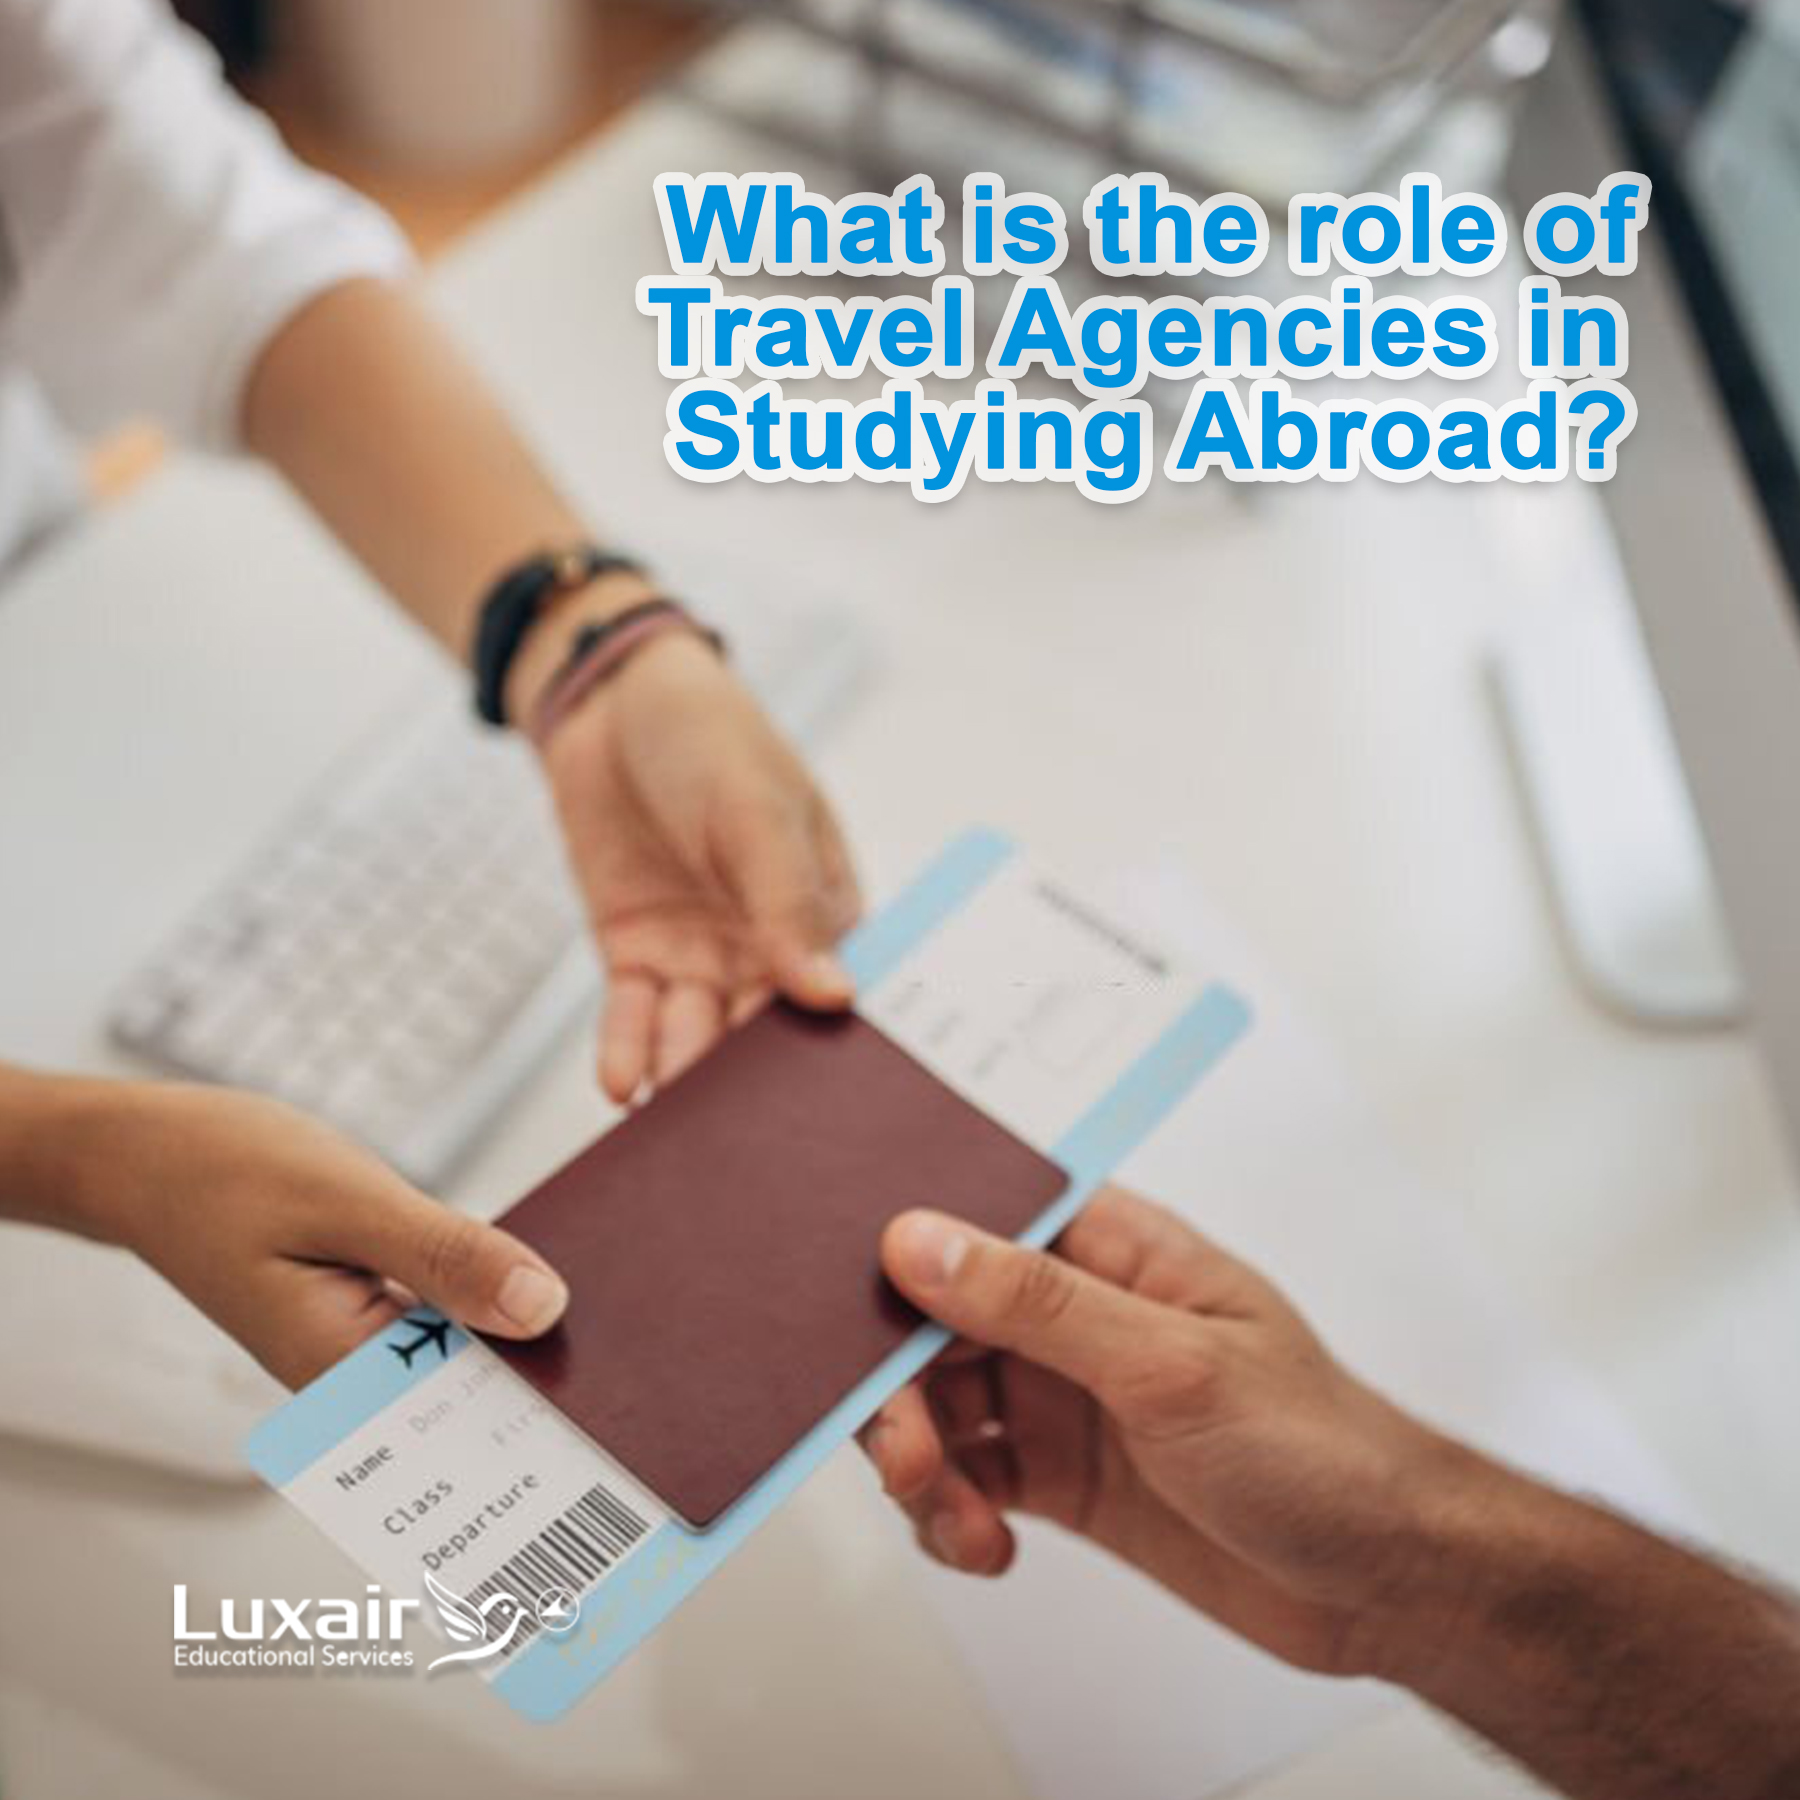 the role of travel agencies in studying abroad